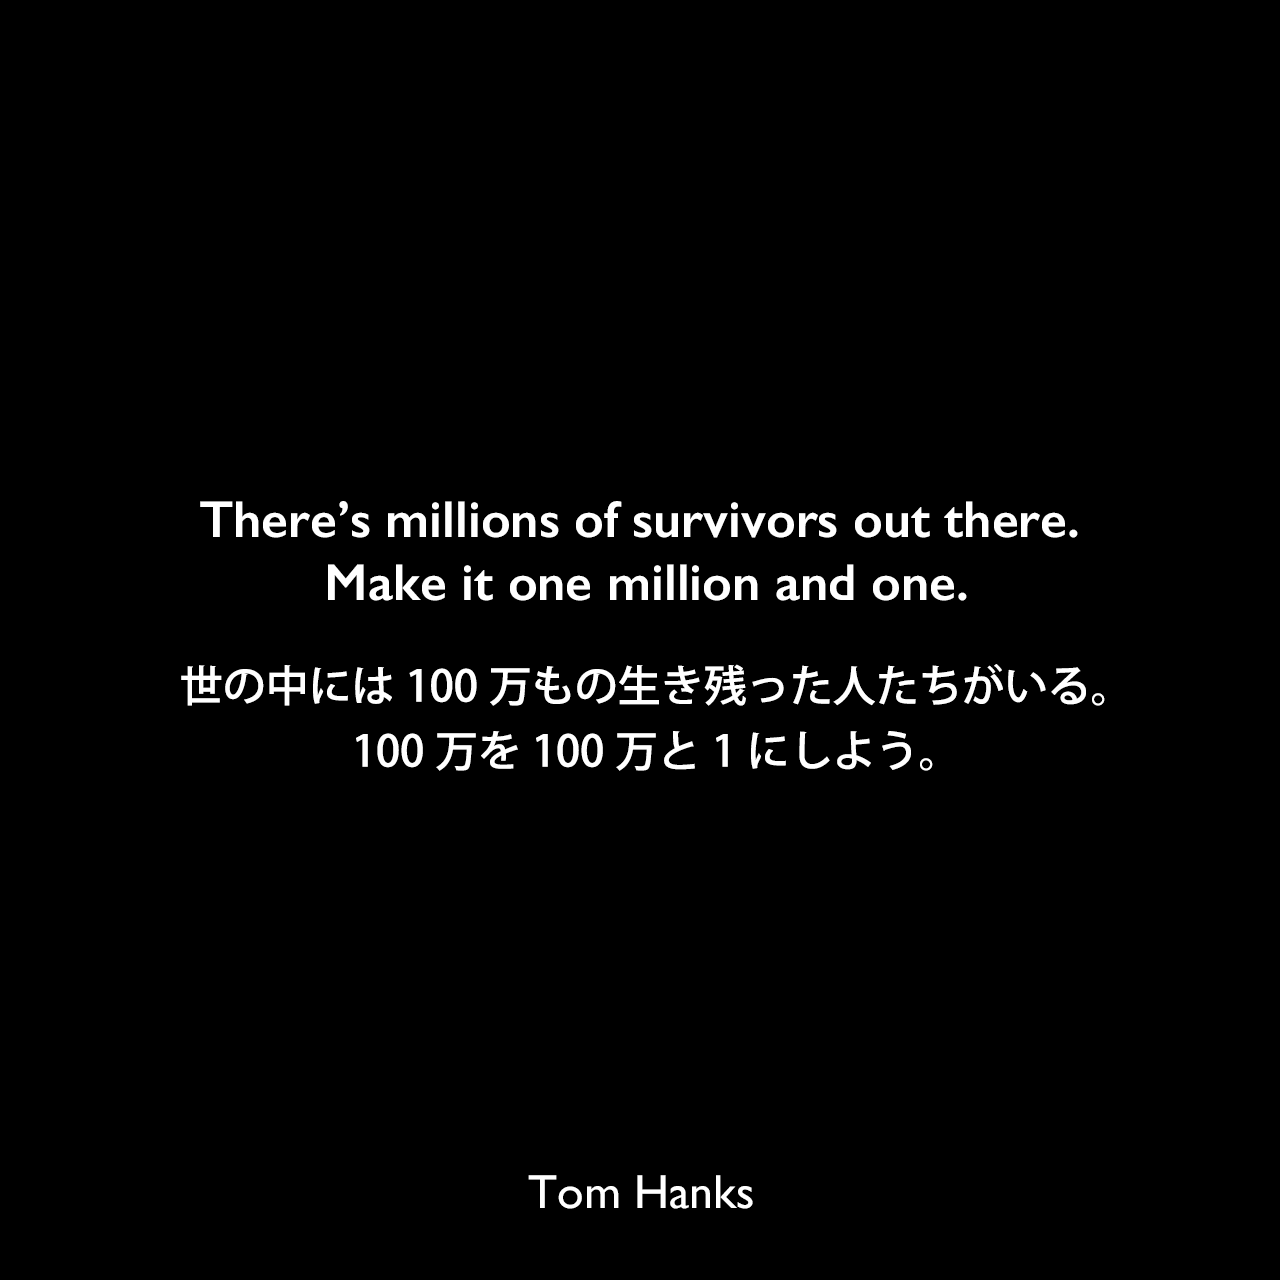 There’s millions of survivors out there. Make it one million and one.世の中には100万もの生き残った人たちがいる。100万を100万と1にしよう。Tom Hanks